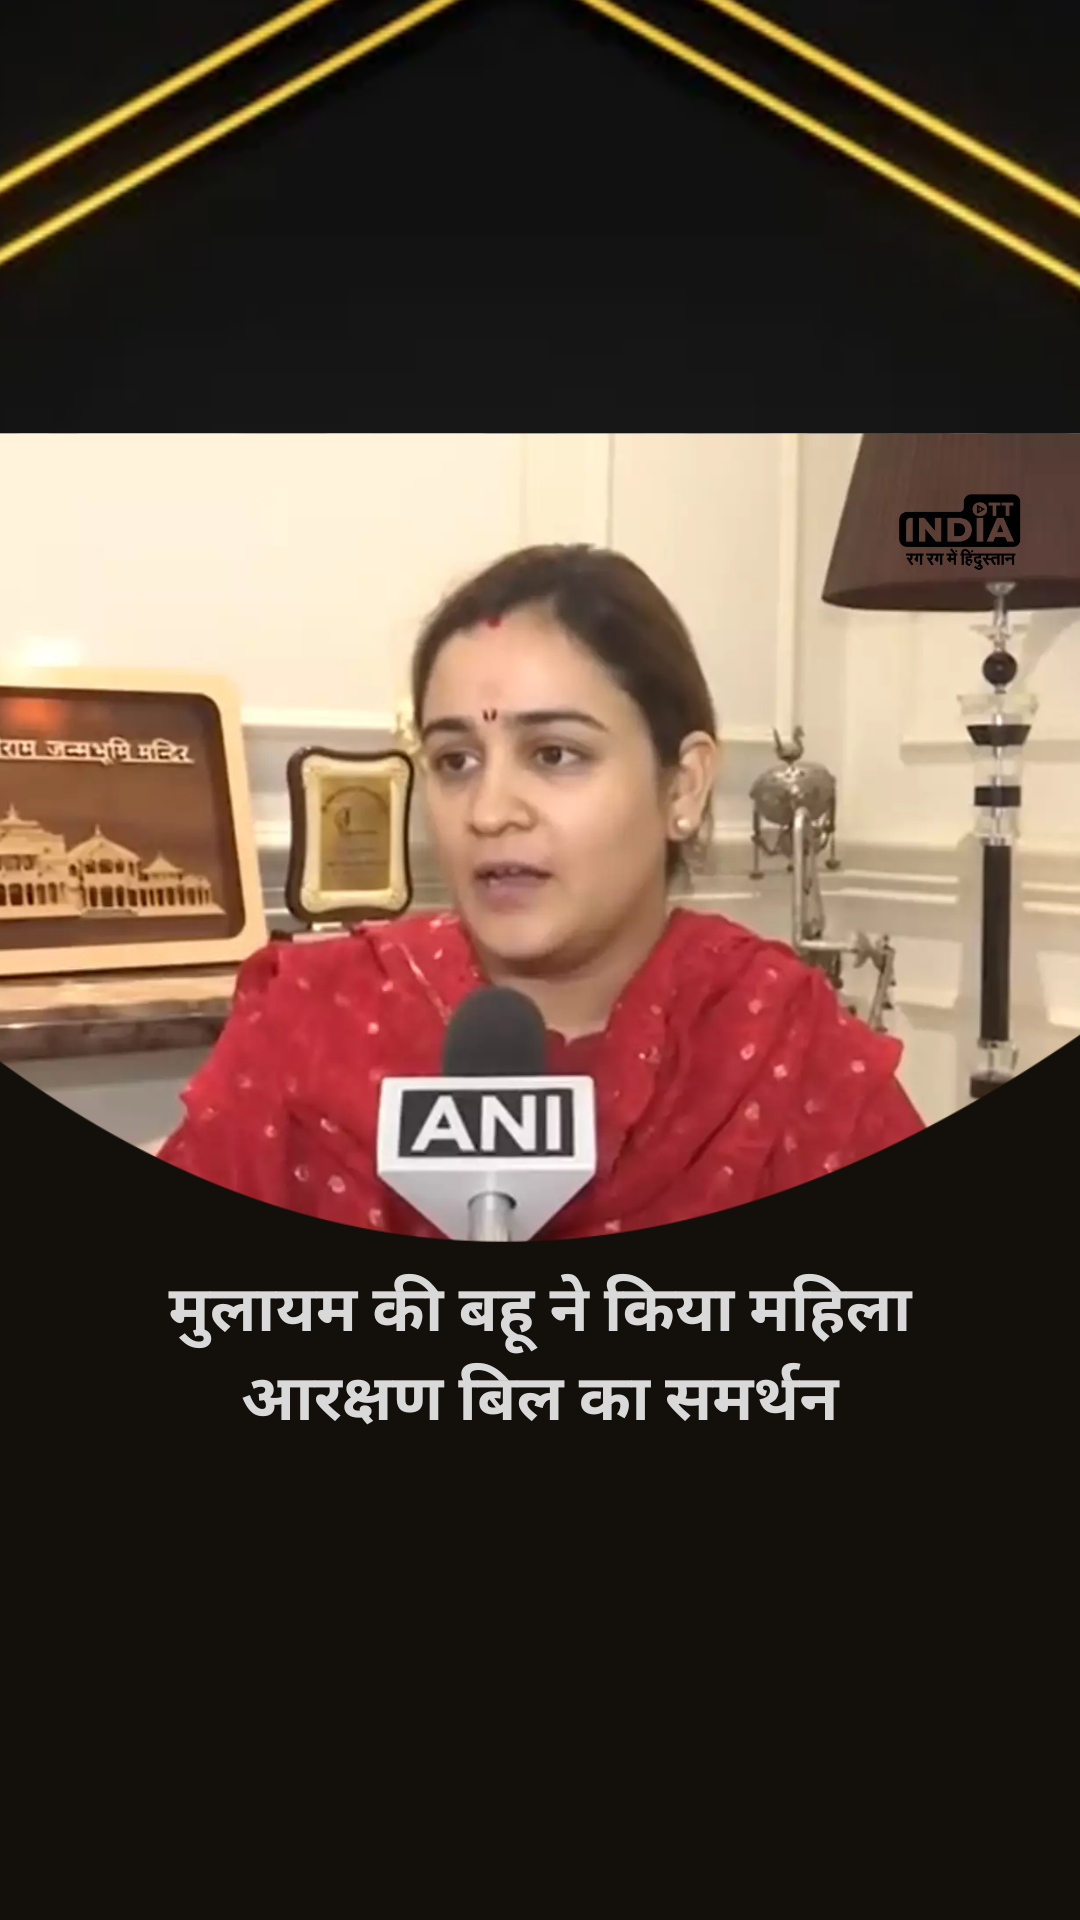 Mulayam Singh Yadav's daughter-in-law Aparna Yadav supported the women's reservation bill of the central government